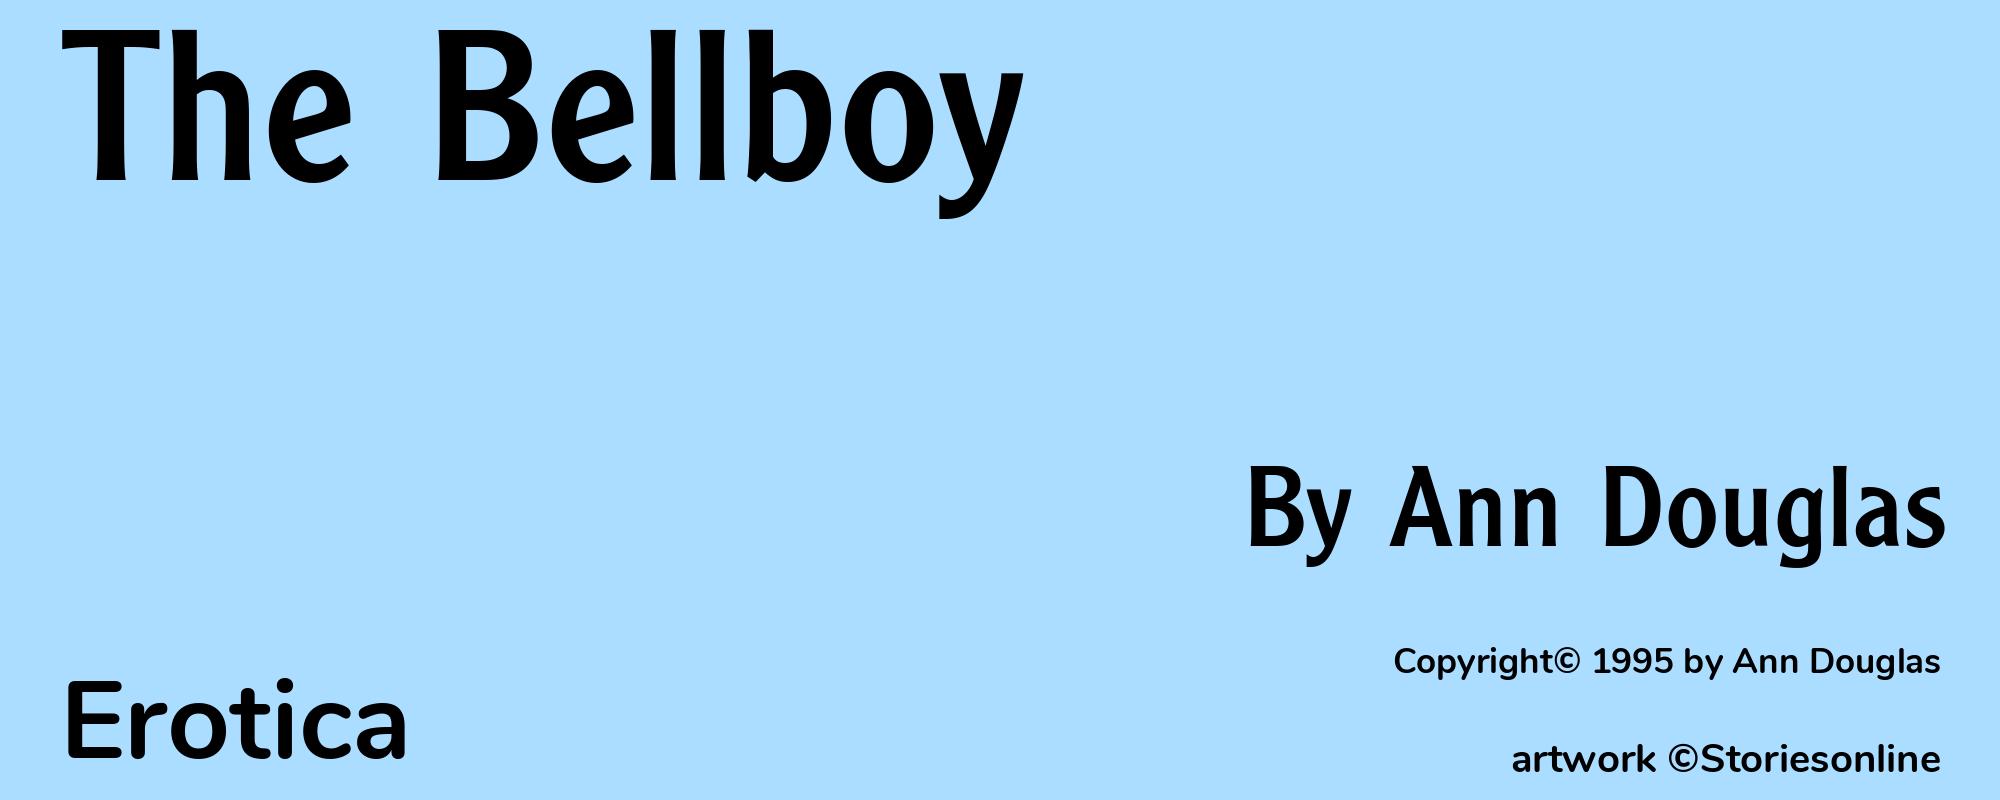 The Bellboy - Cover